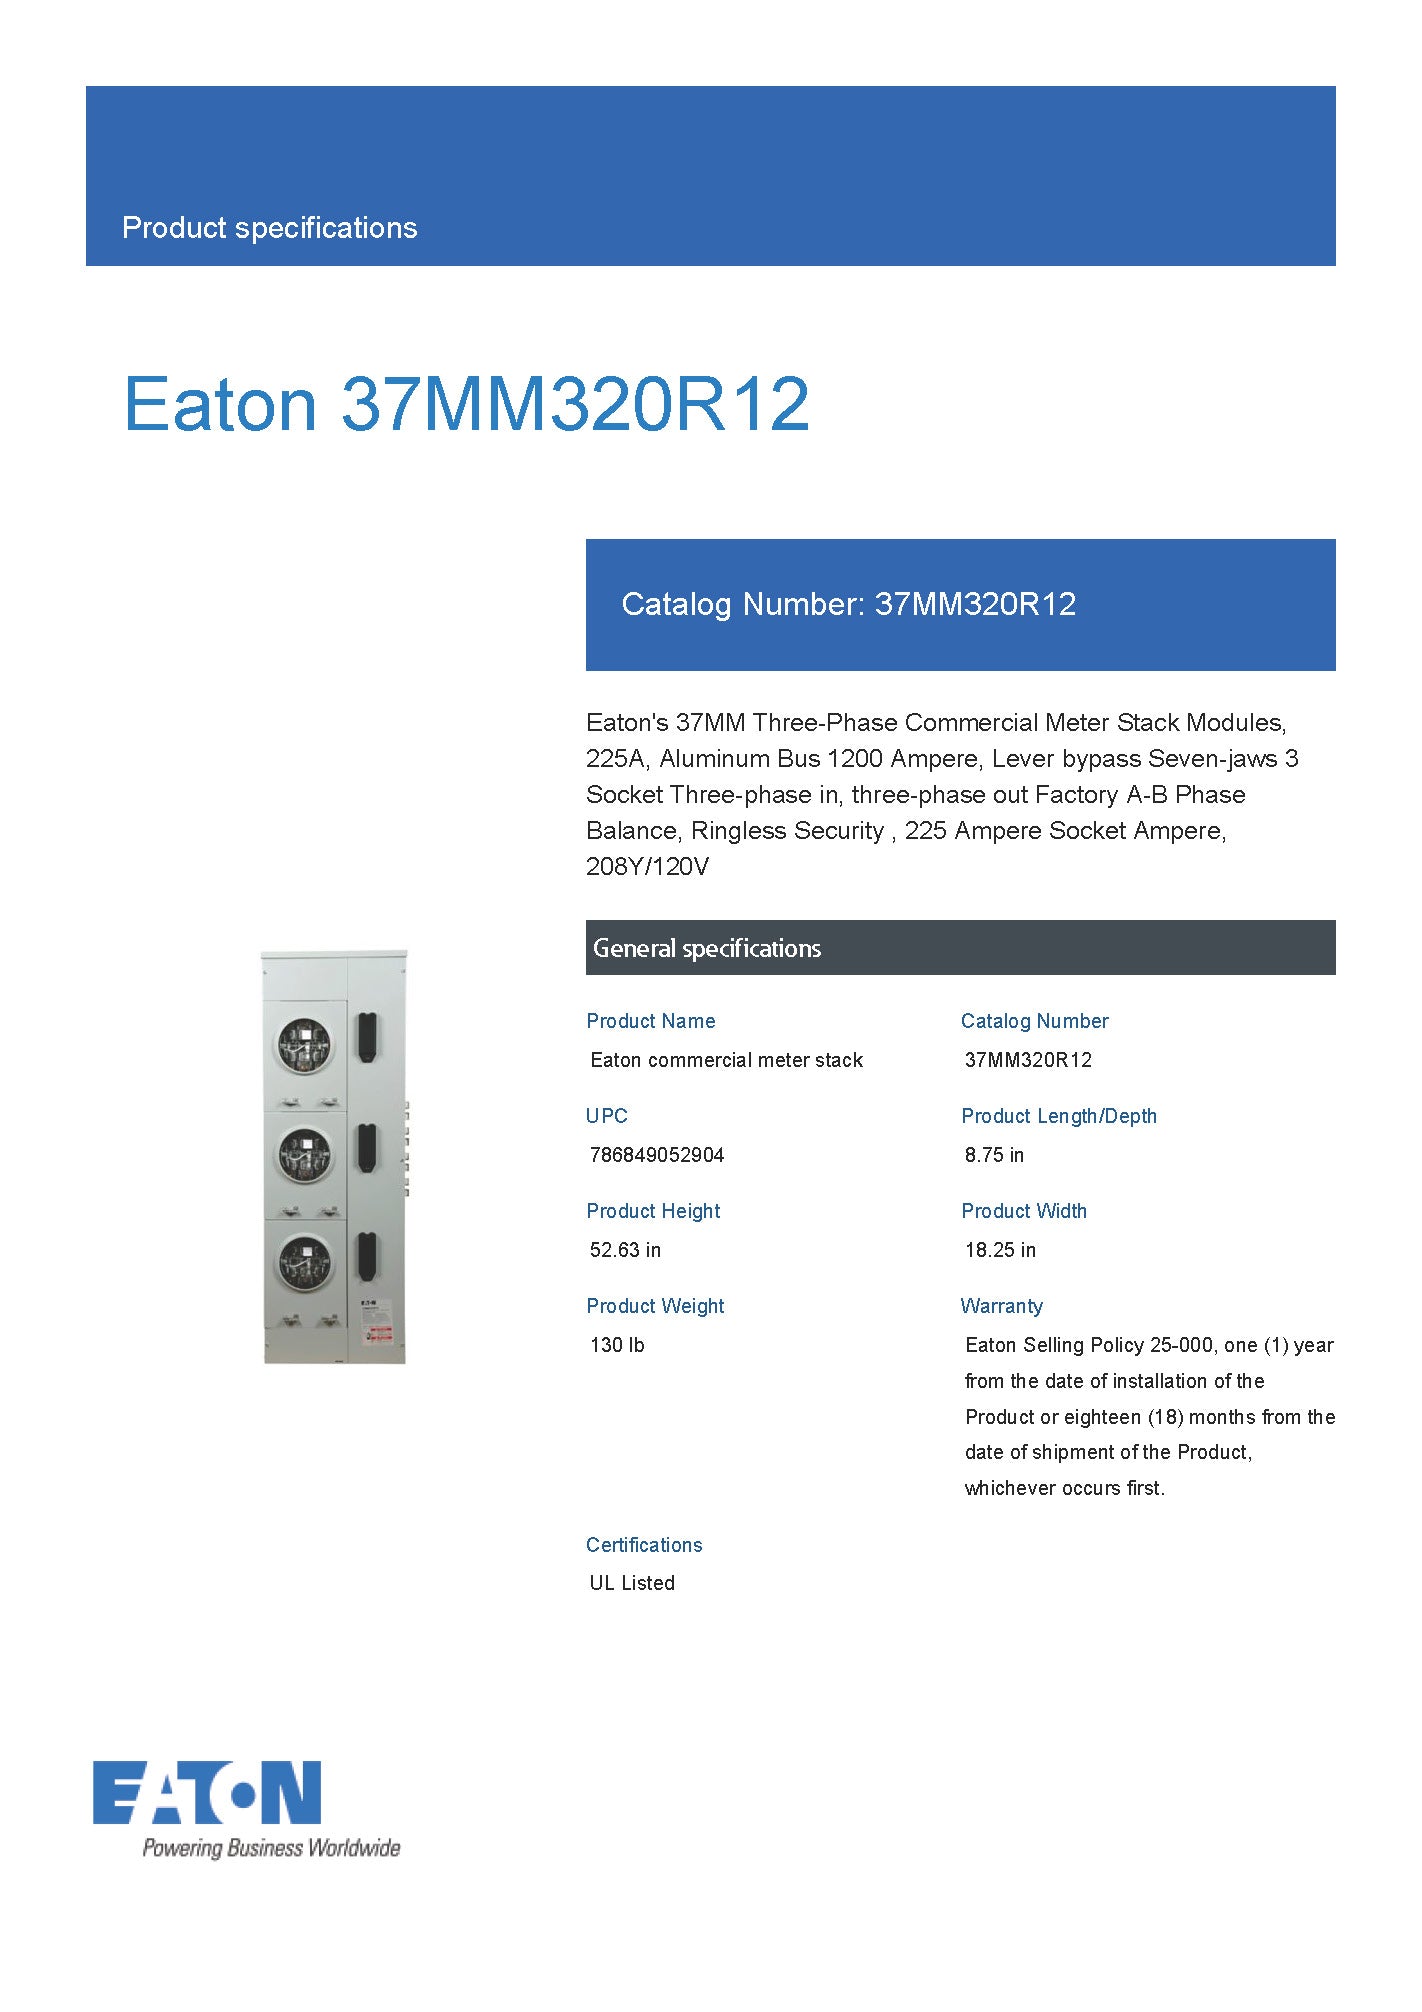 Eaton 37MM320R12 3PH In / 3PH Out Lever Bypass 225A Socket 1200A Bus Ringless Meter Stack